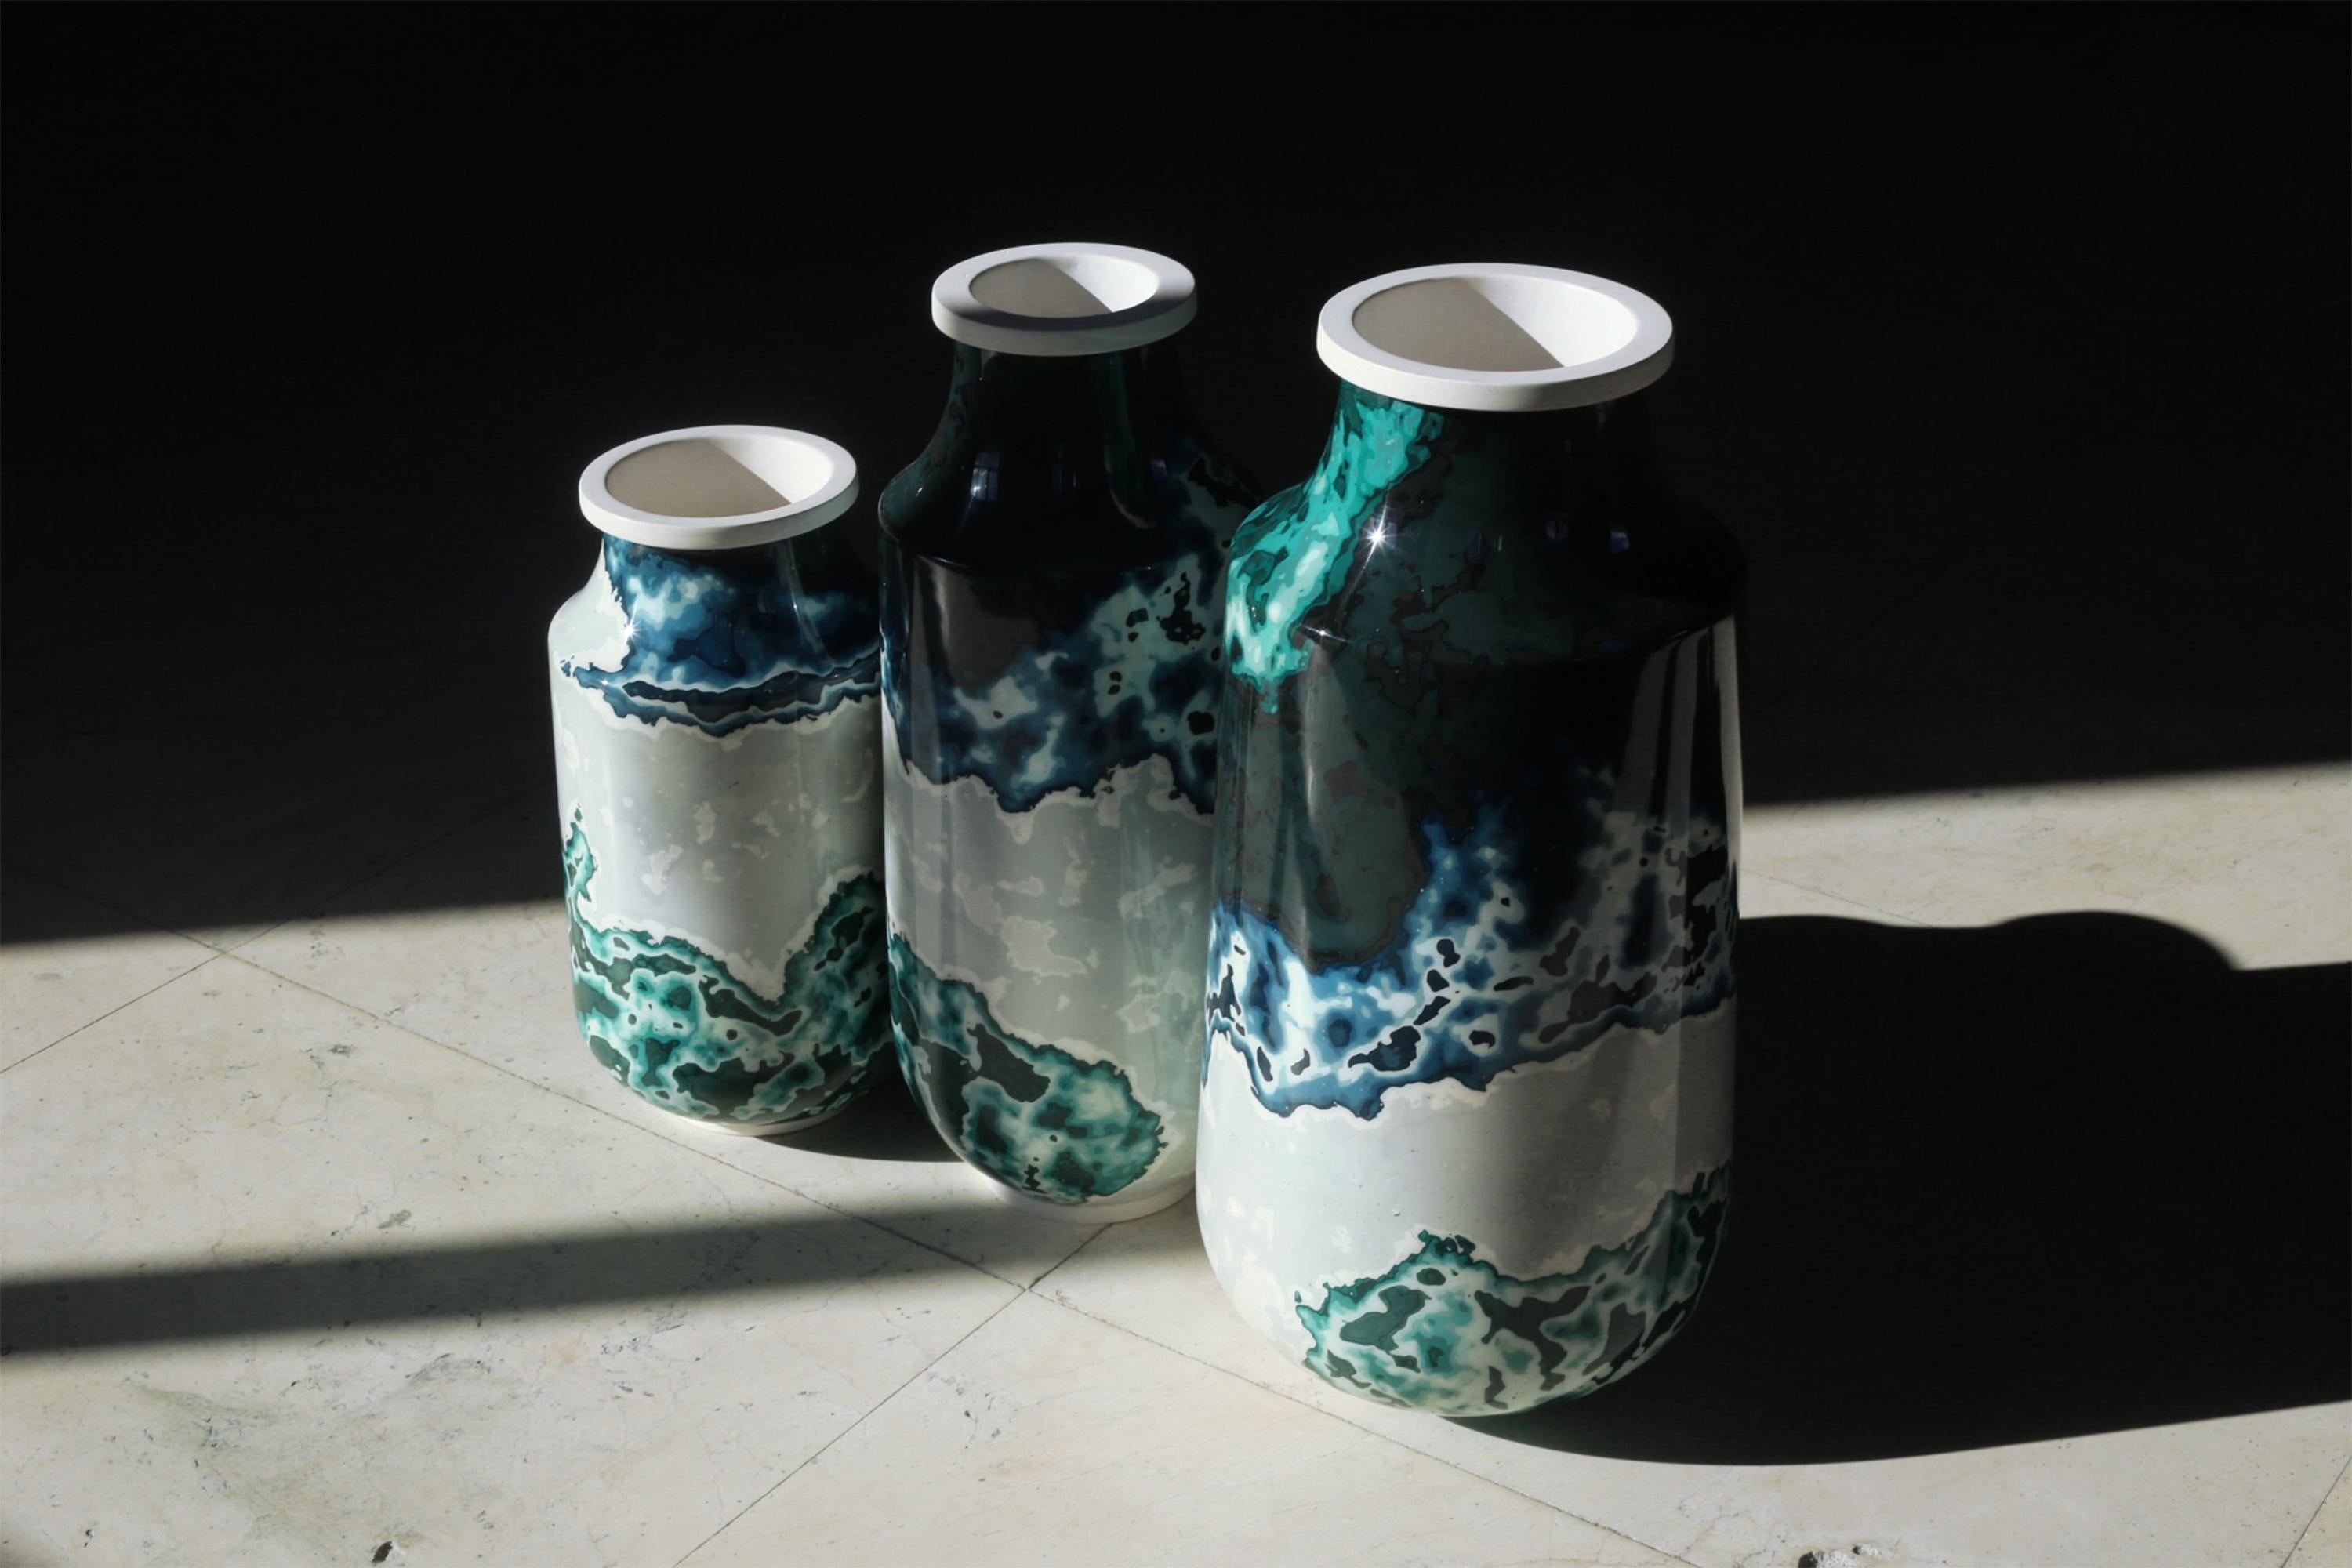 Cloud Stone, Set of 3Contemporary Vases / Vessels in Blue & Green by Nic Parnell For Sale 2